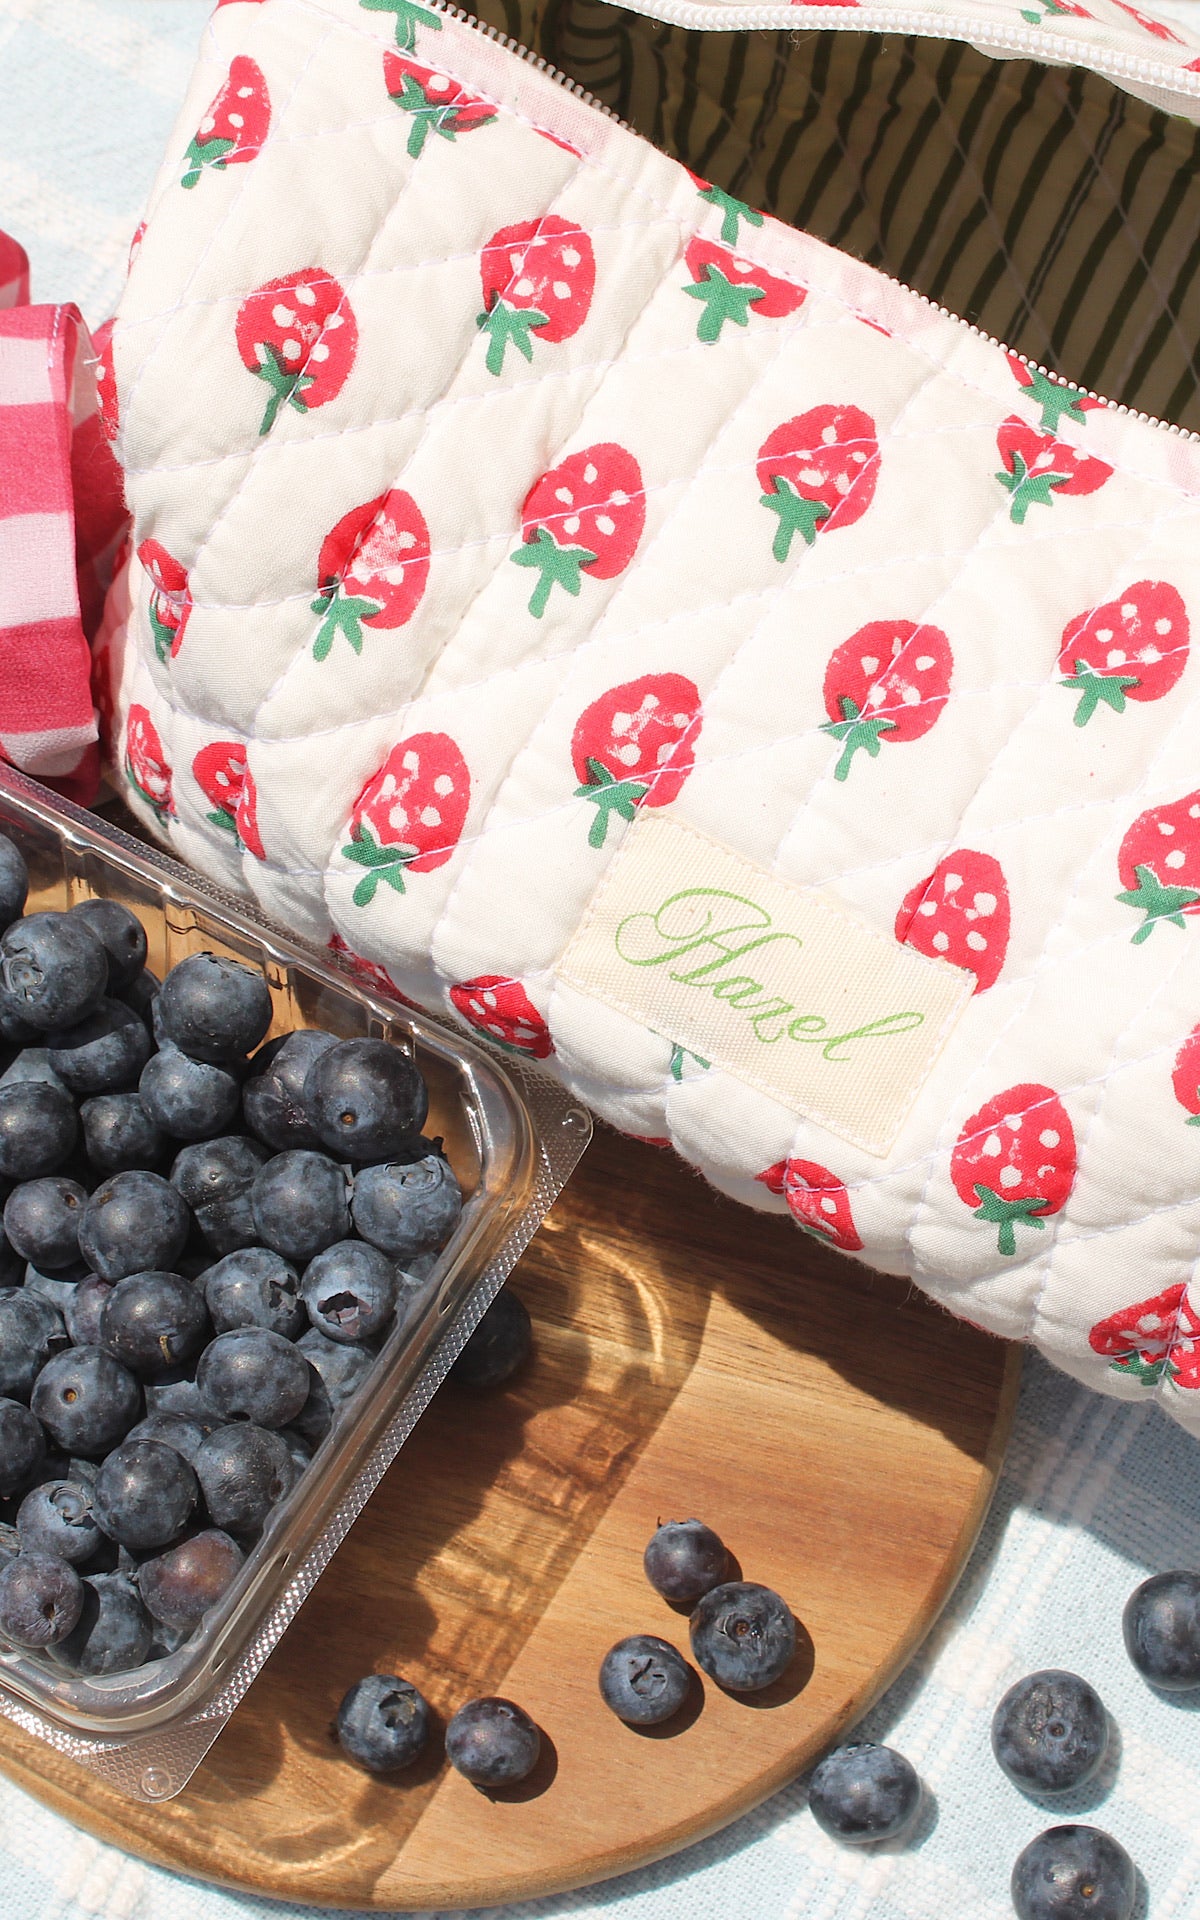 The HB Strawberry Bag